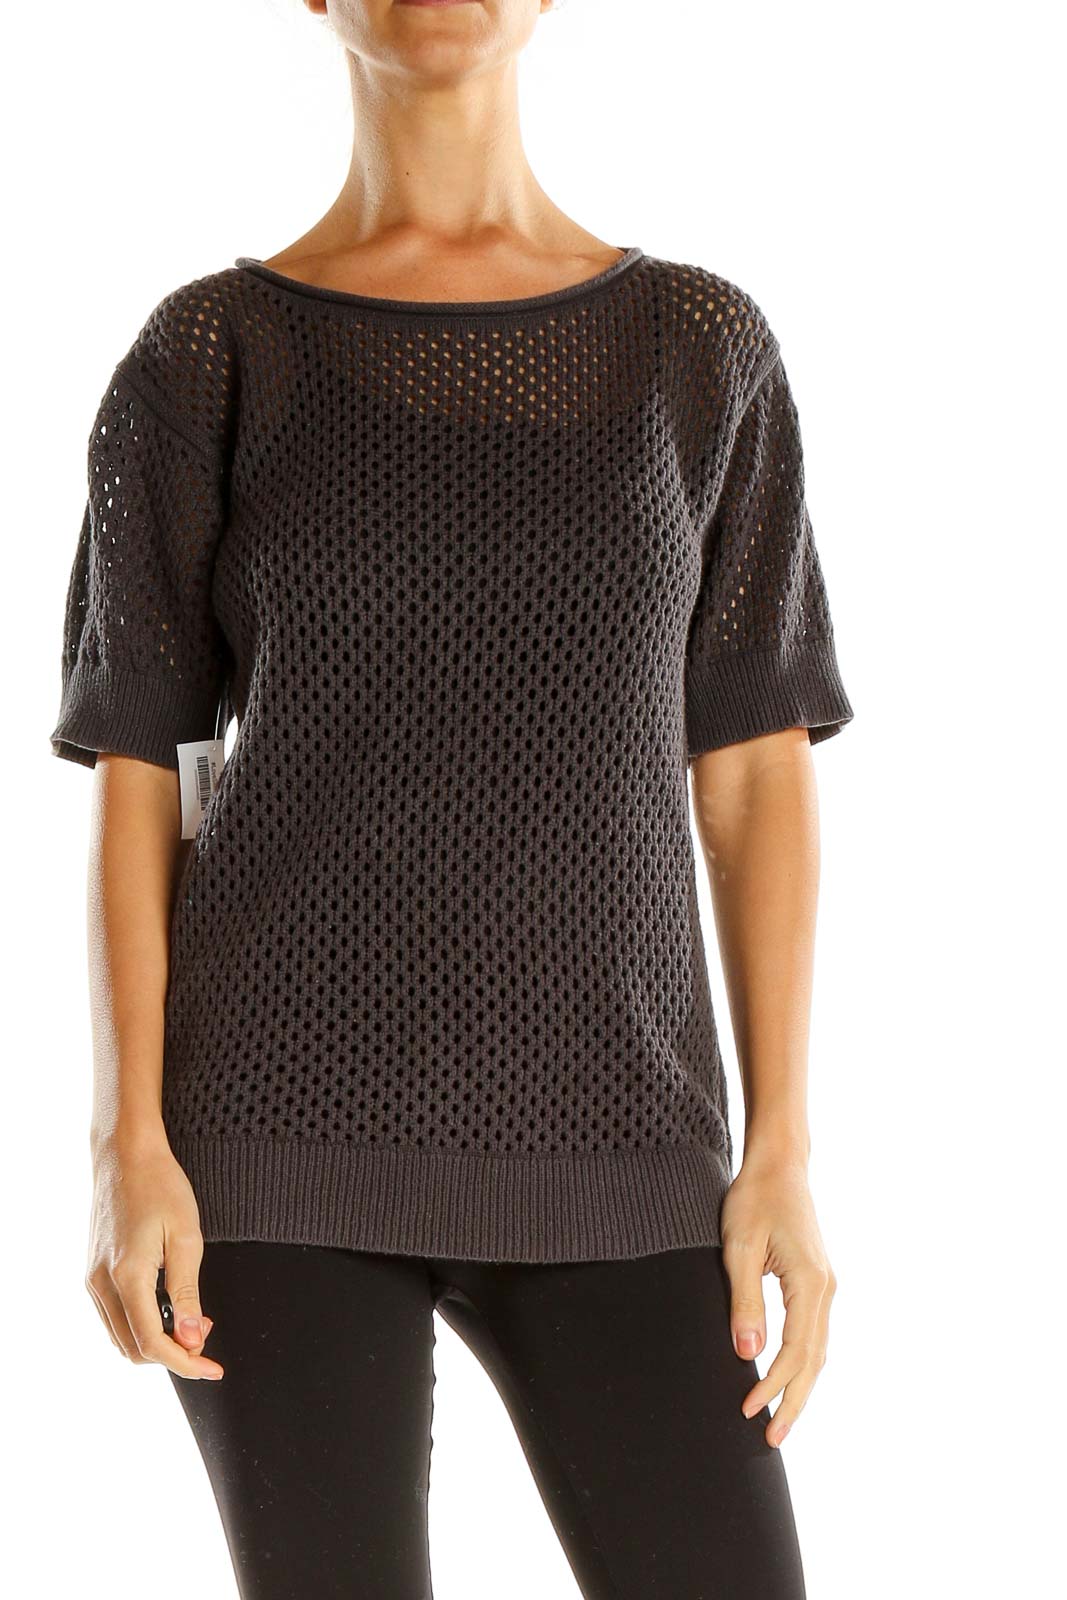 Brown Mesh All Day Wear Sweater Top Front